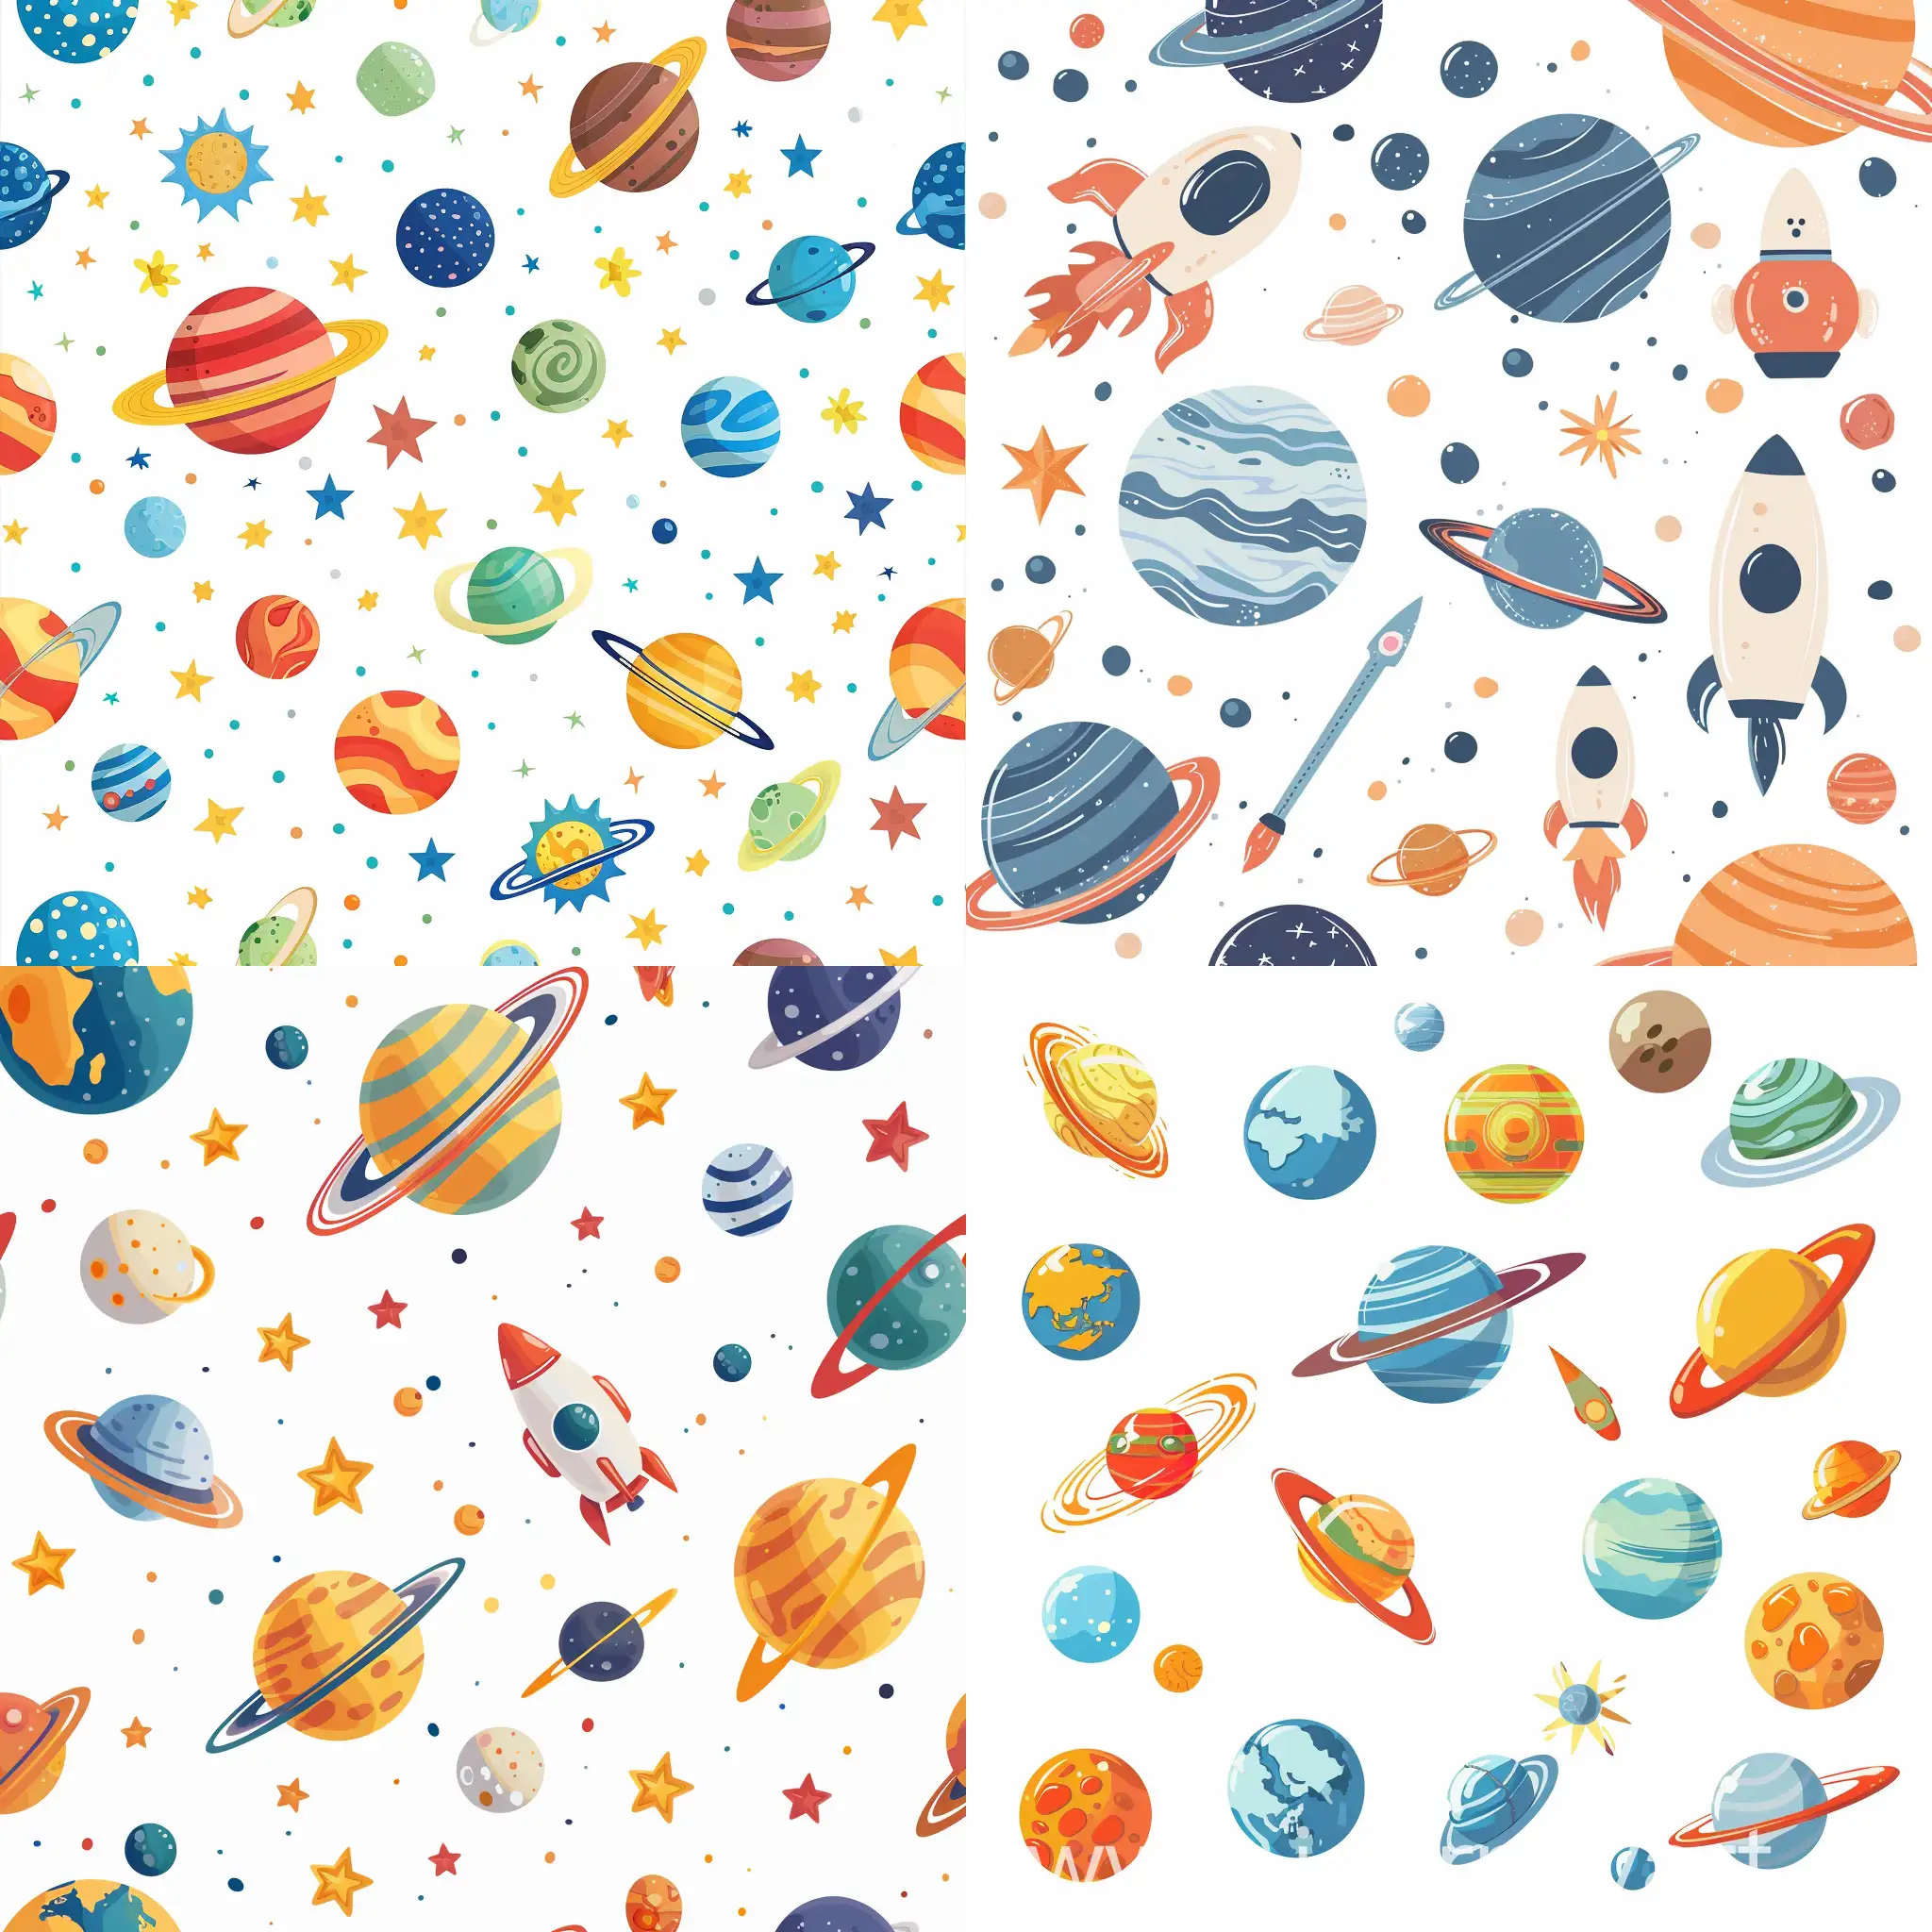 adorable 2D planets and space objects white background